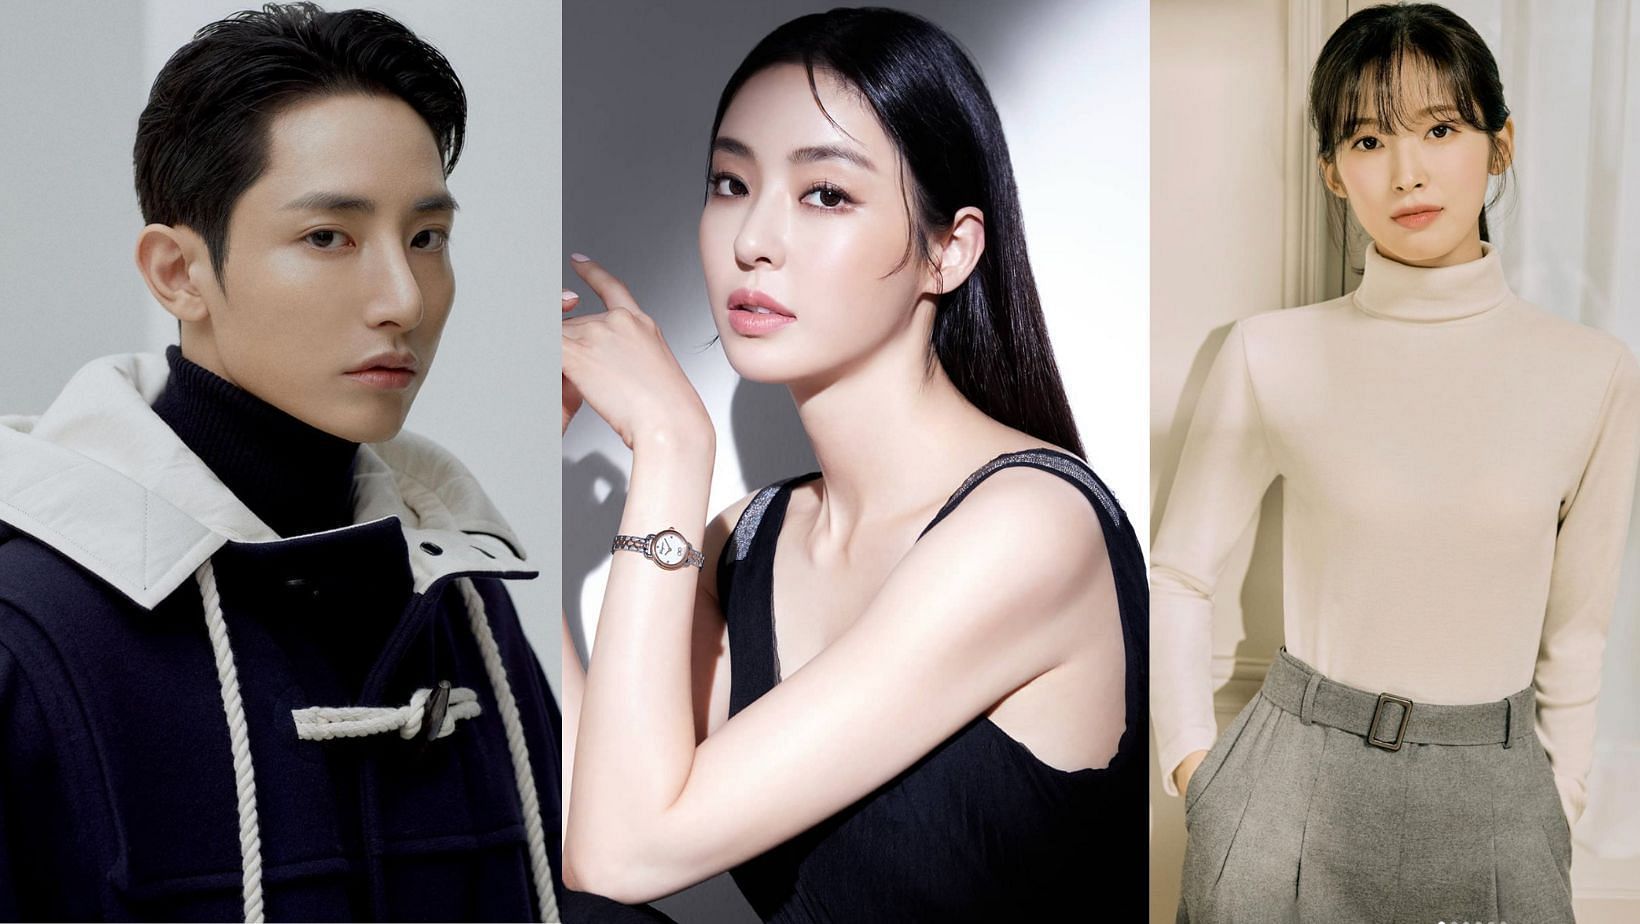 Featuring Lee Soo Hyuk (left), Lee Da Hee (centre), and OH MY GIRL&rsquo;s Arin (right). (Images via Instagram)